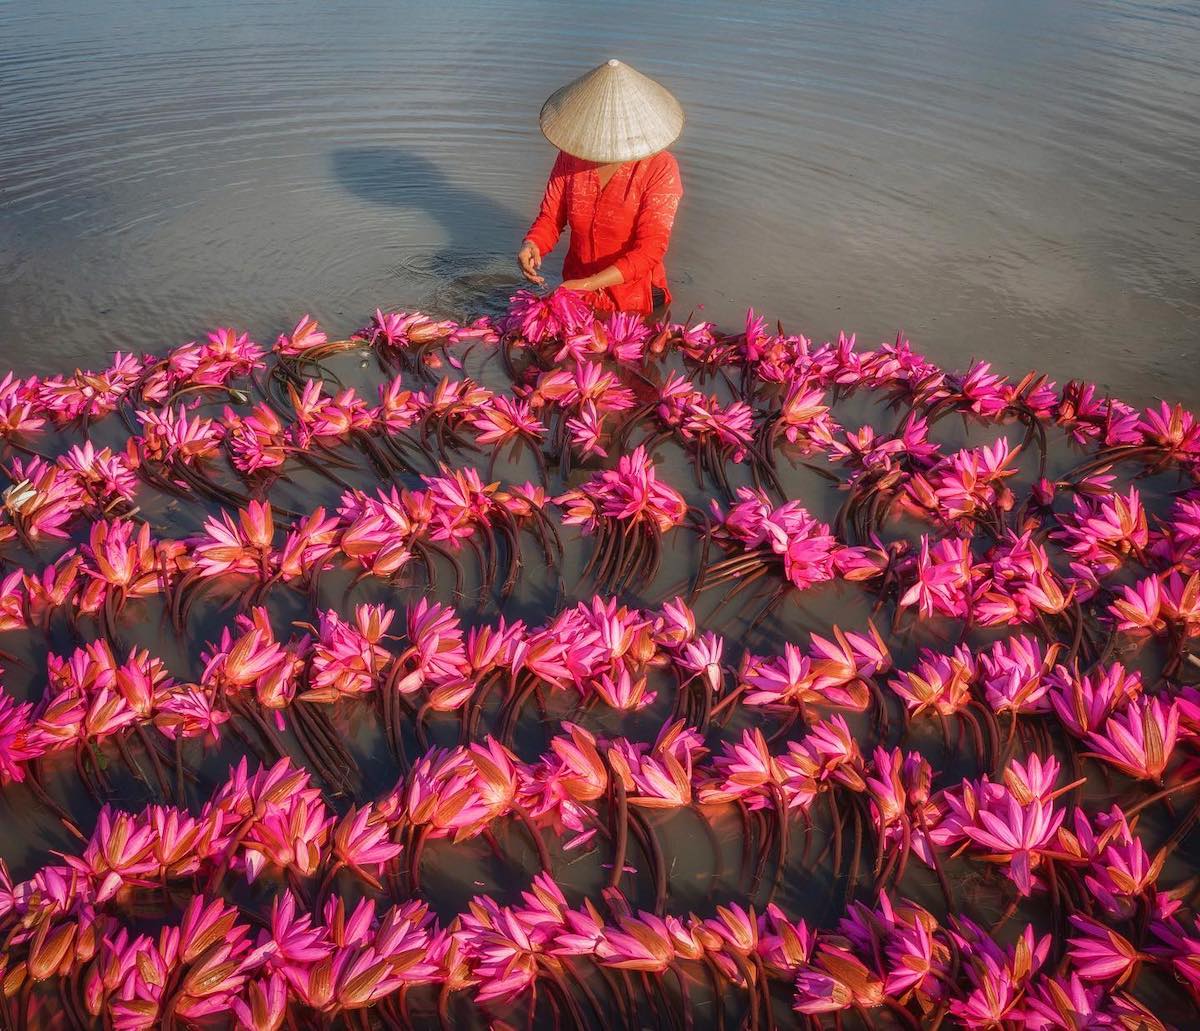 Lilies in the Mekong Delta